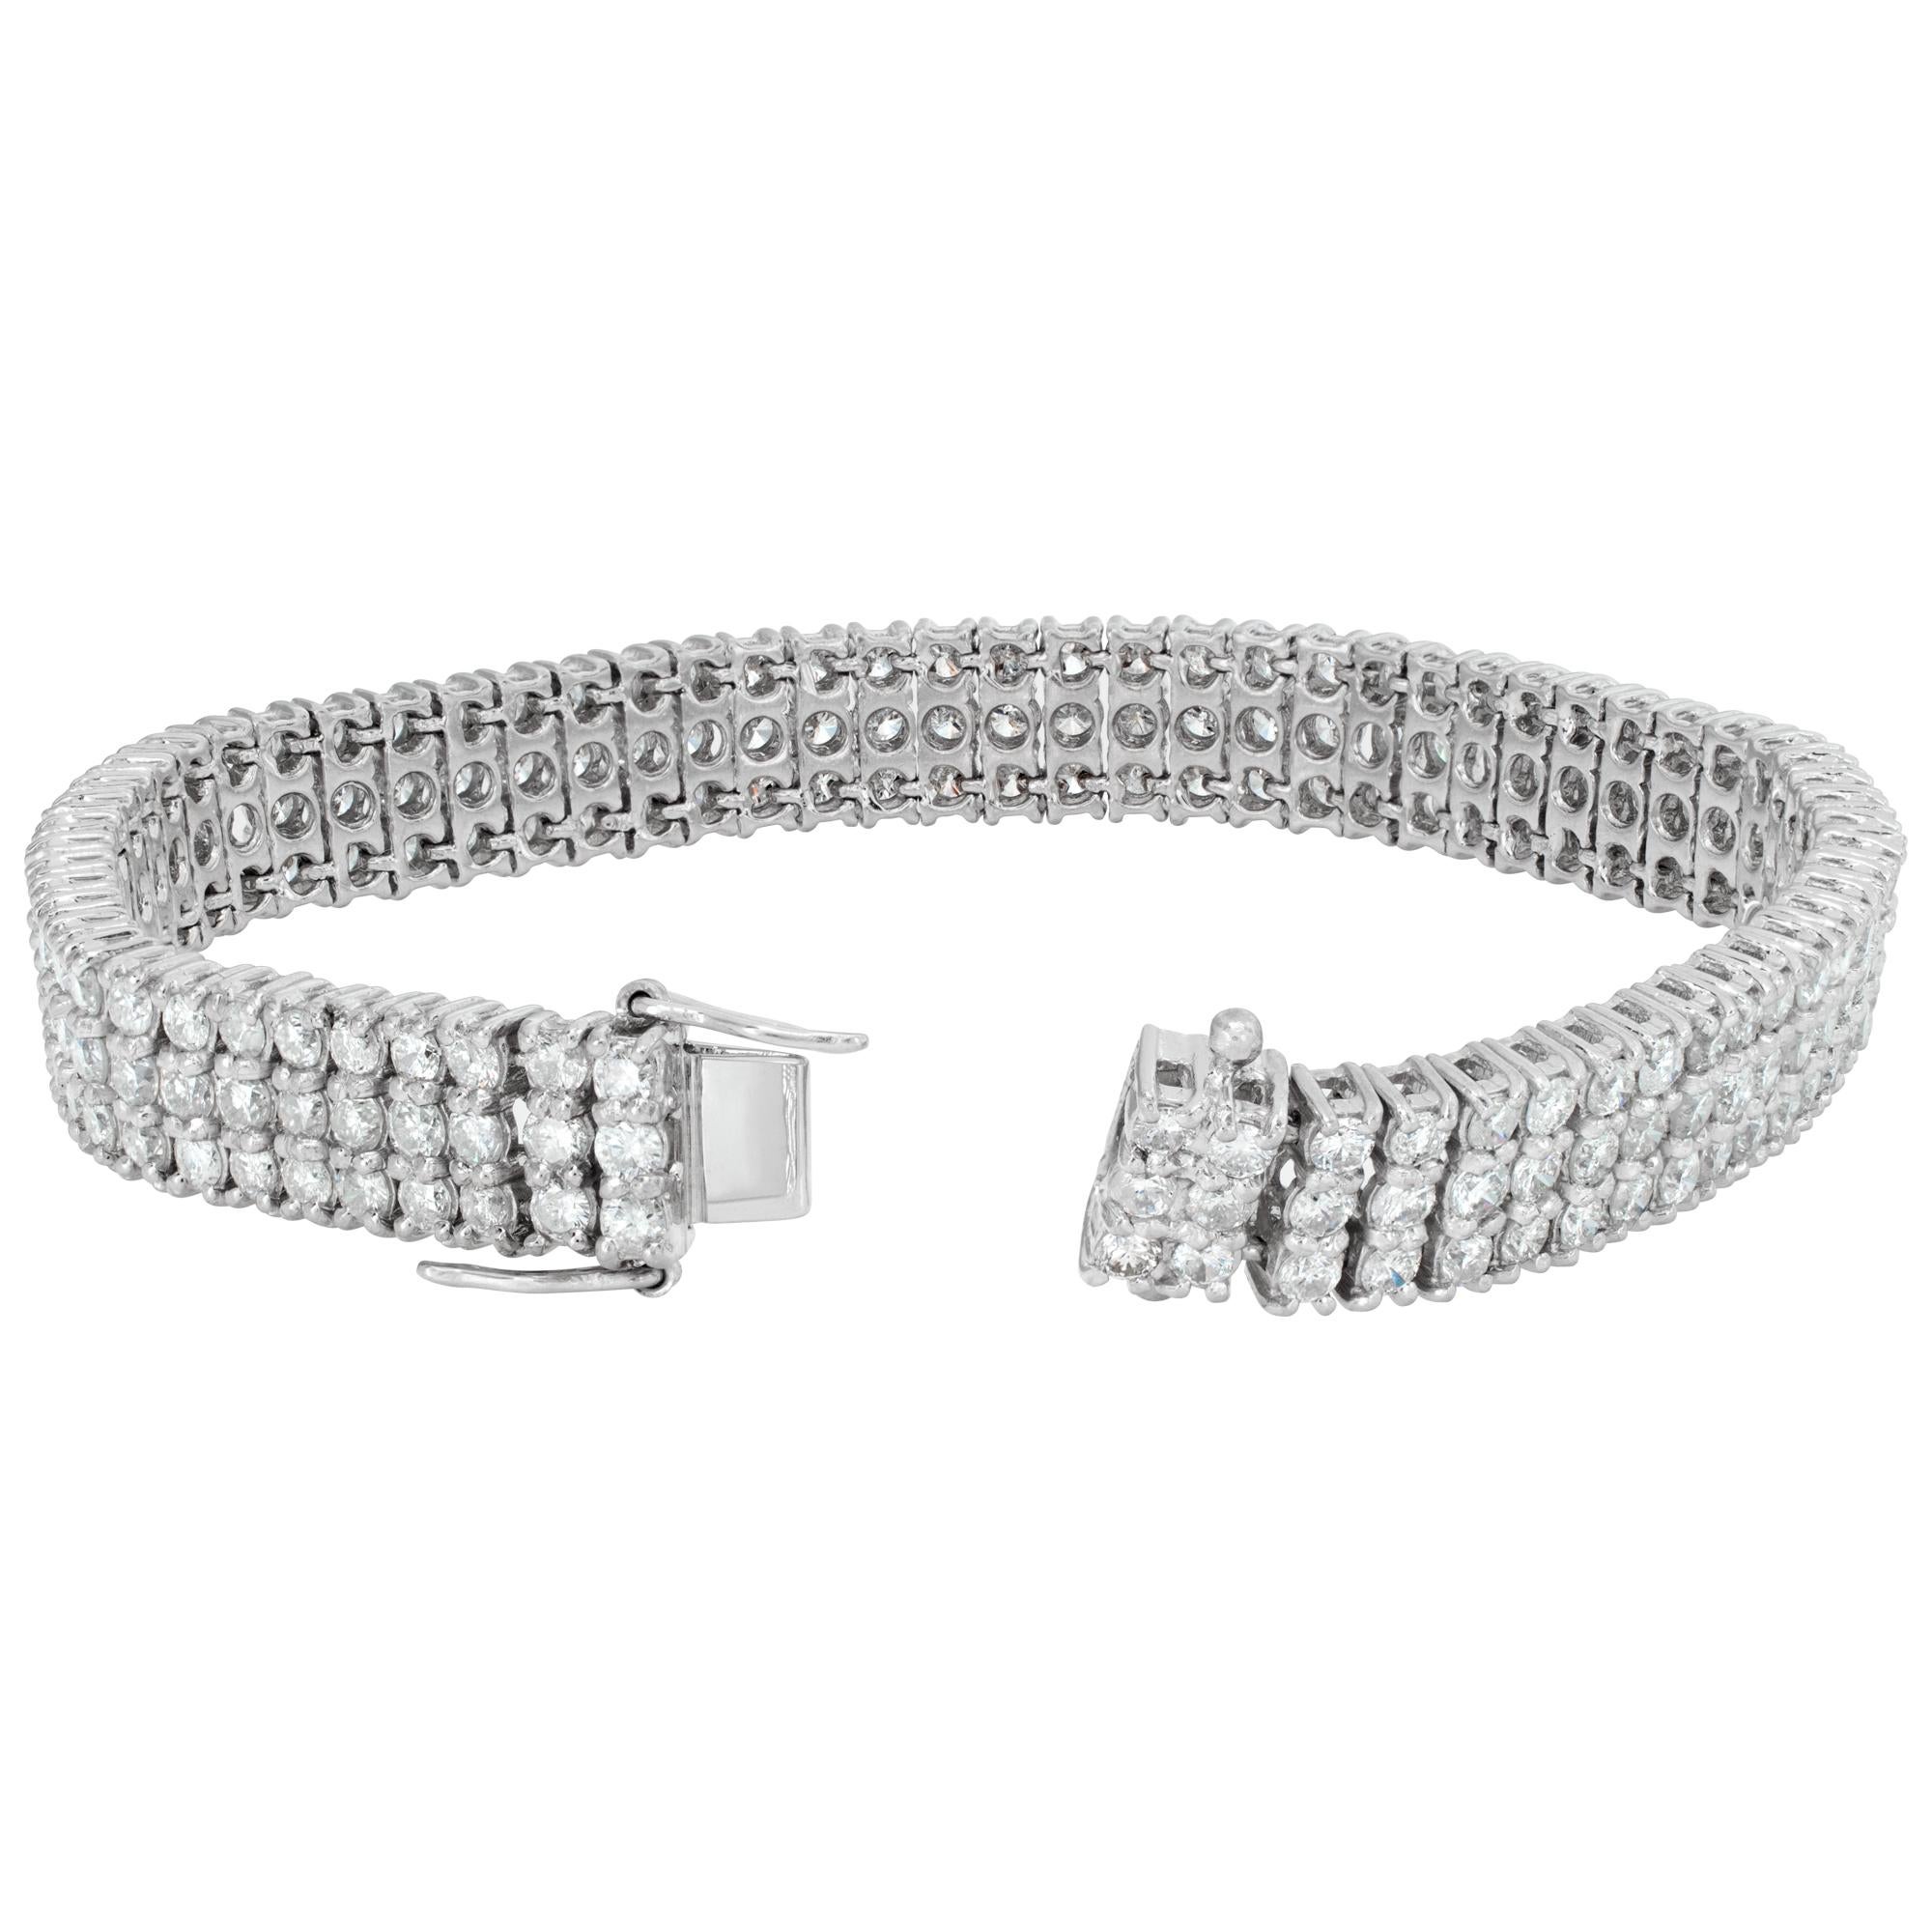 Triple row diamond line bracelet in platinum with approximately 10 carats in round cut diamonds, H-I color, SI-I1 clarity. Measures 7 inch length, width 9mm.
